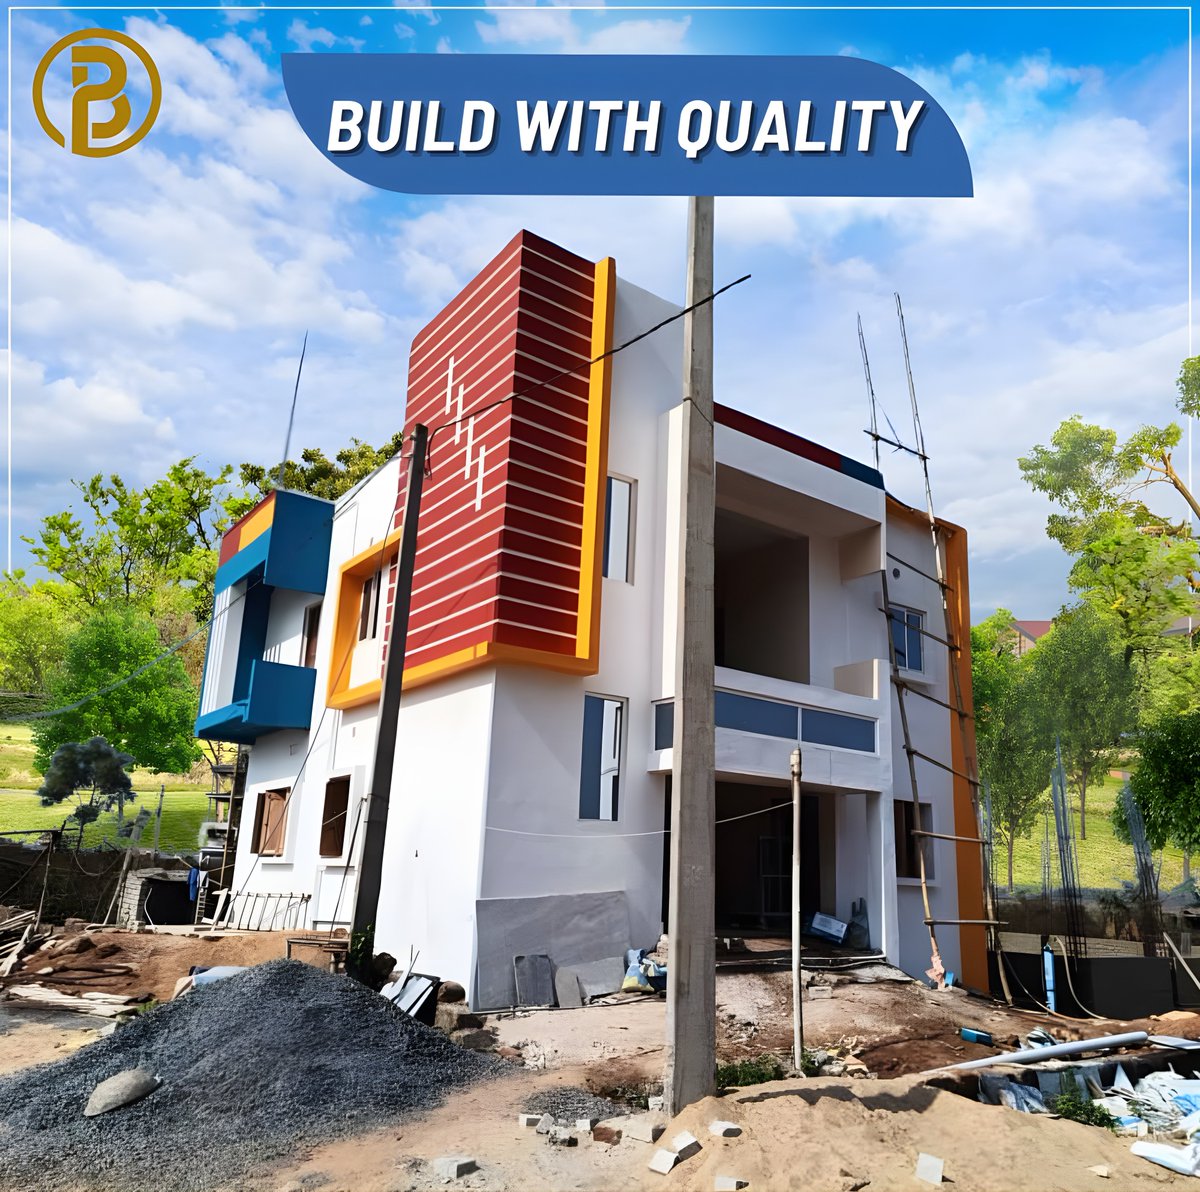 Build your home with top quality materials !
We always use the best quality materials for the new home construction. Visit us on patrabuilders.com for more information
#bestqualitymaterials #qualityfirst #constructionindustry #constructioncompany #homebuilders #newhome